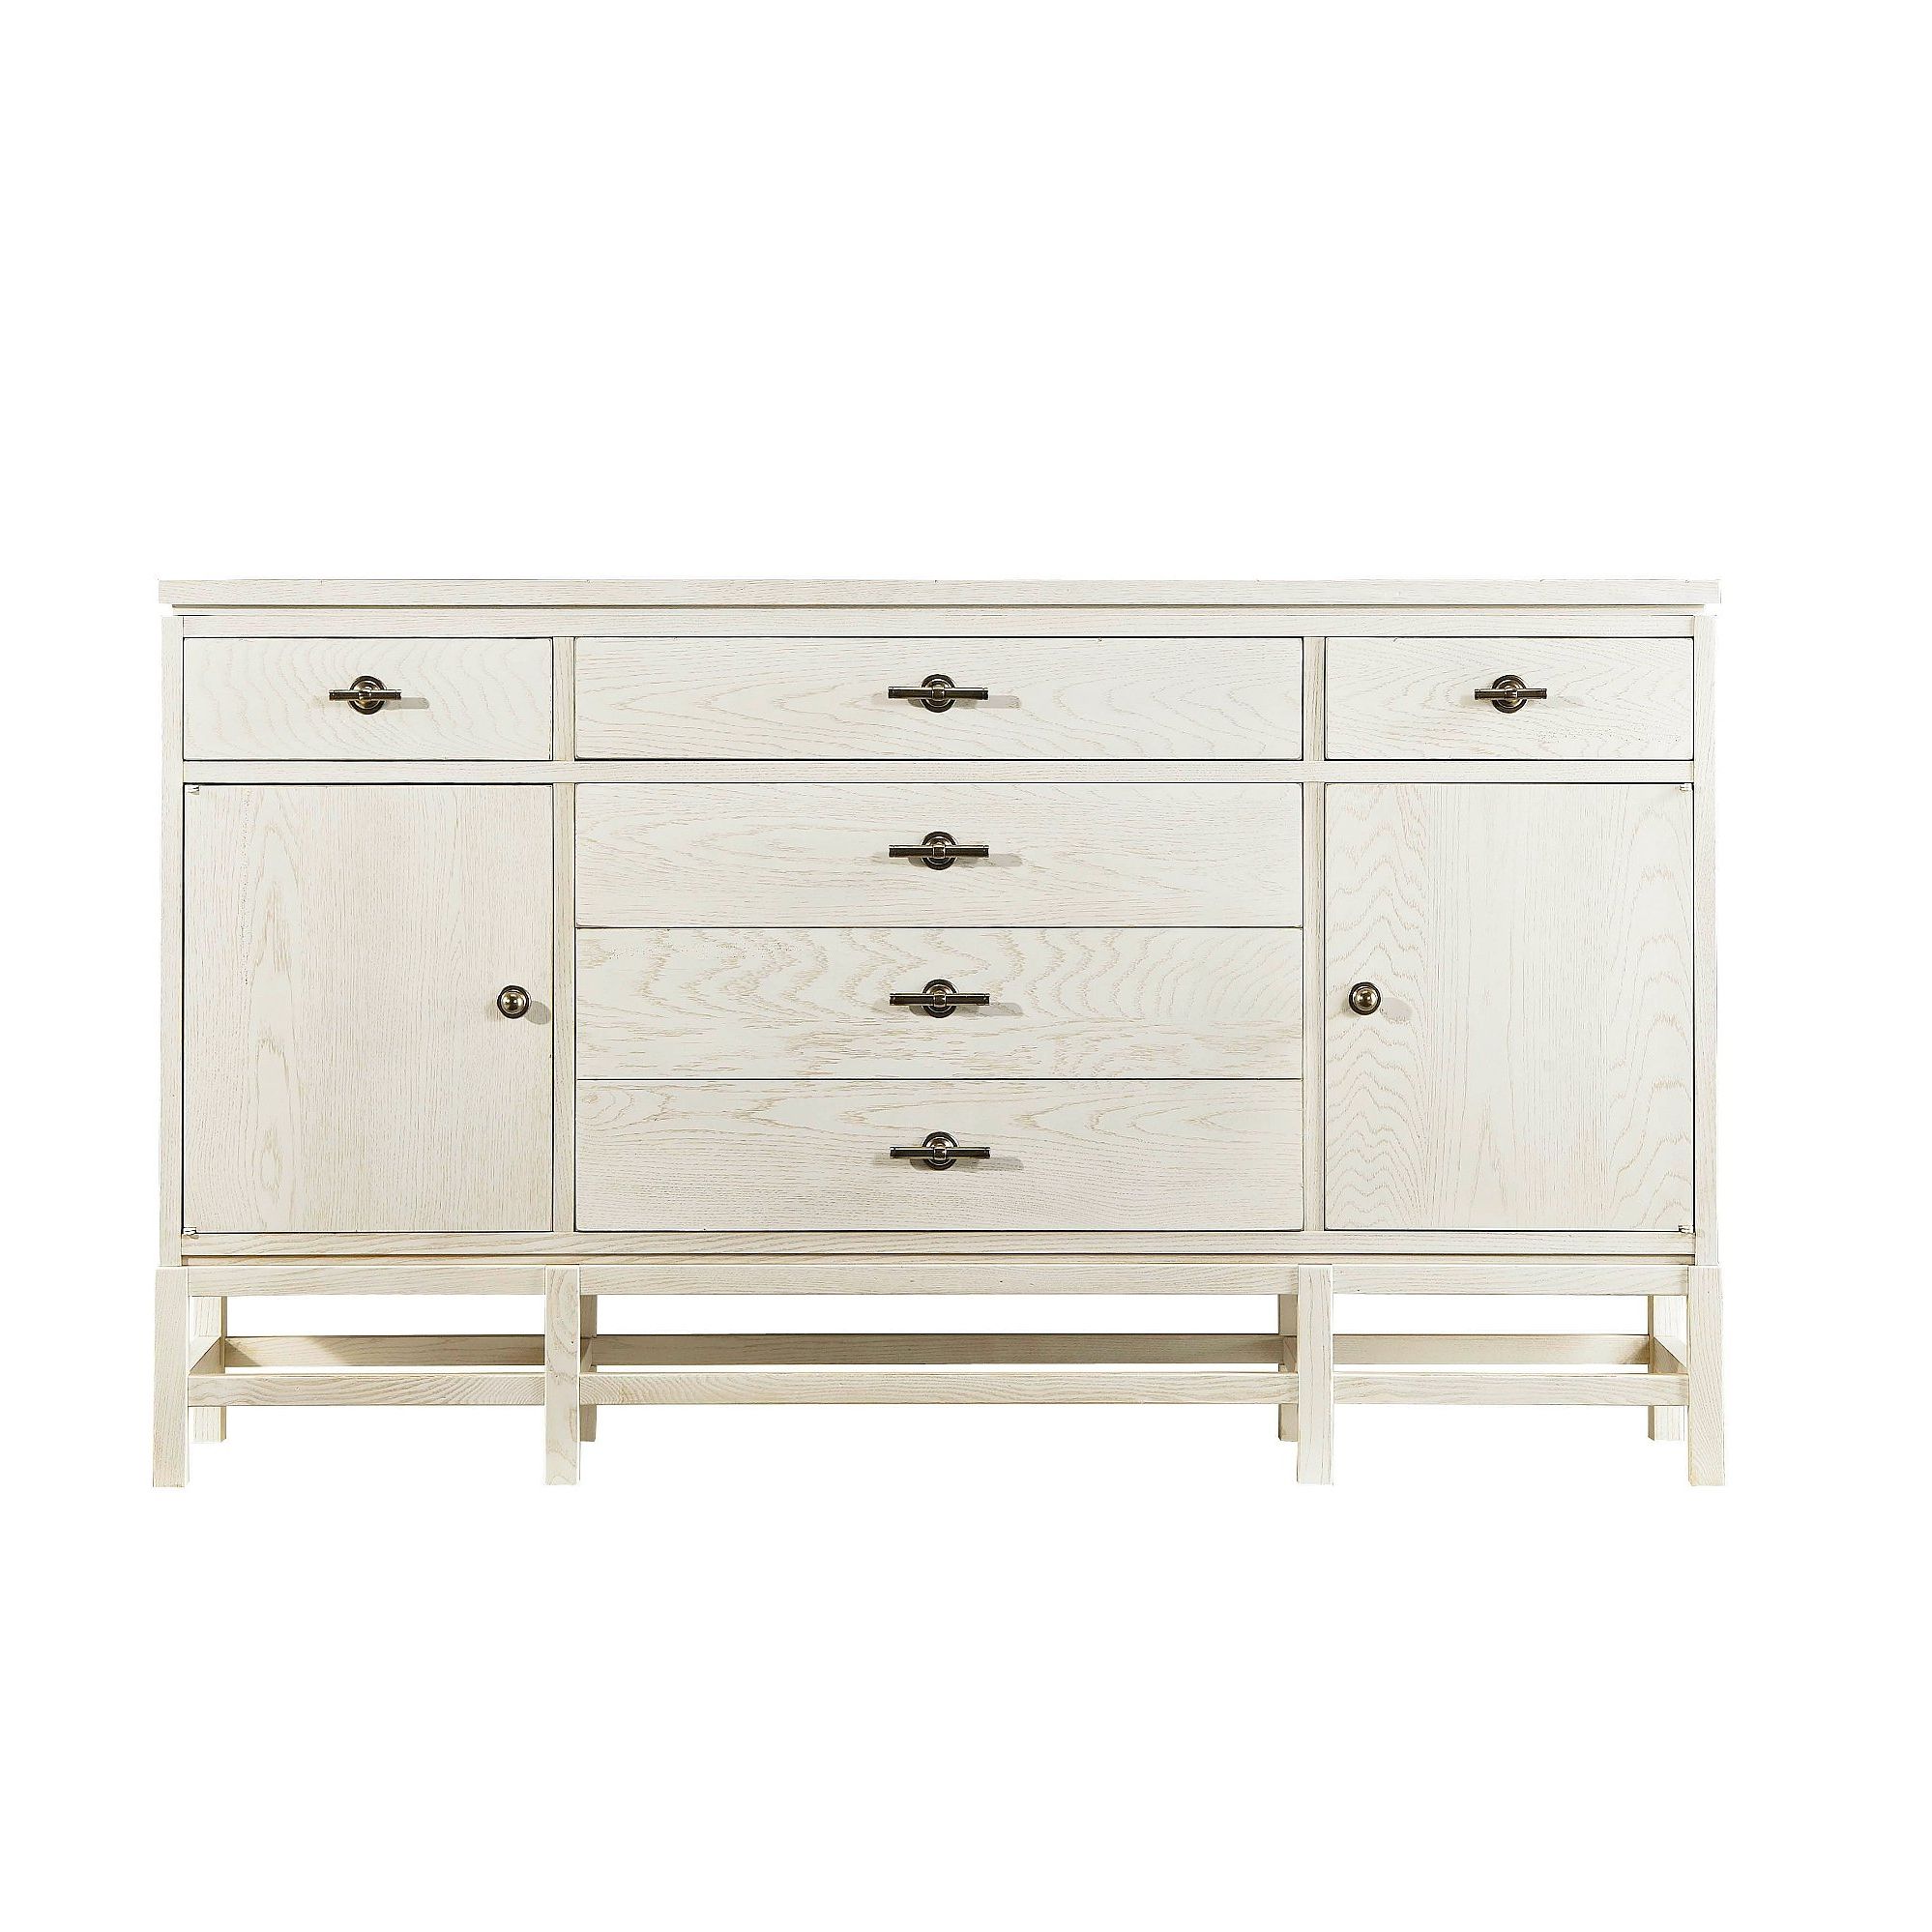 Silverware Storage Equipped Sideboards & Buffets | Joss & Main In Payton Serving Sideboards (View 16 of 20)